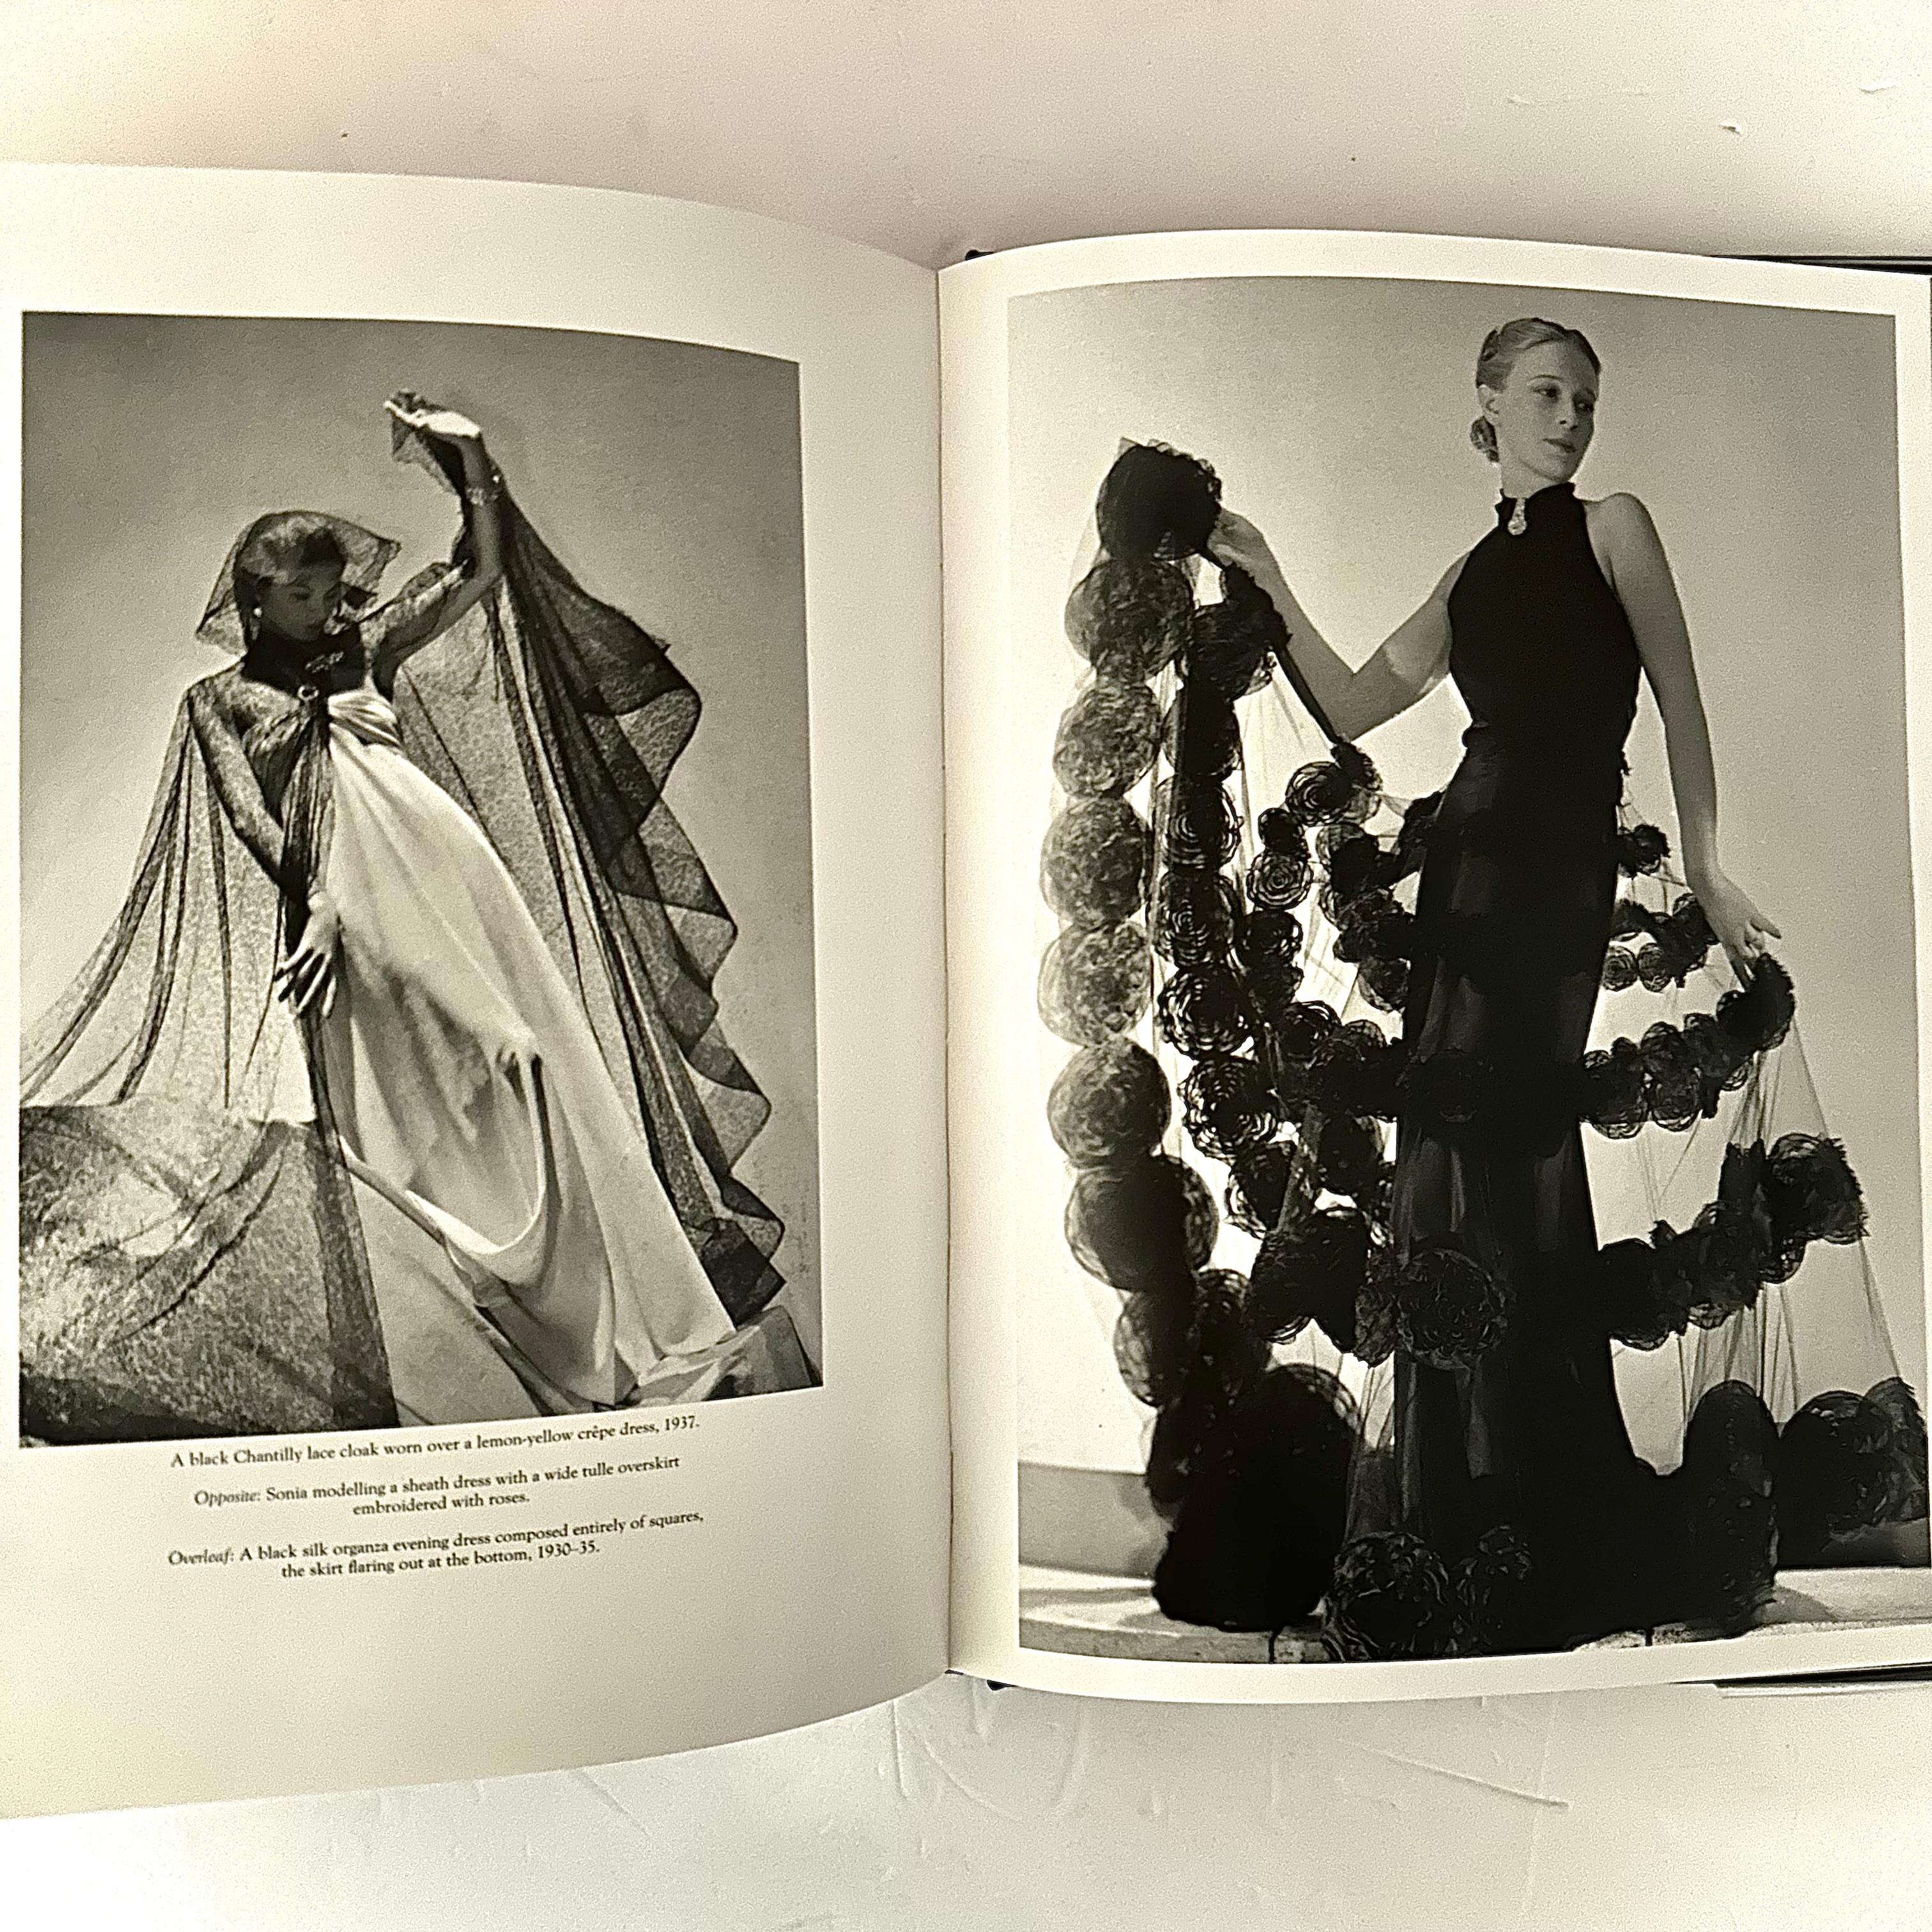 A Rizzoli publication, 1st U. S. edition, New York, 1991. Hardback with English text. Translated from the original French edition.

Synonymous with Haute Couture, Madame Vionnet’s sensuous yet technically excellent couture lent her the reputation of